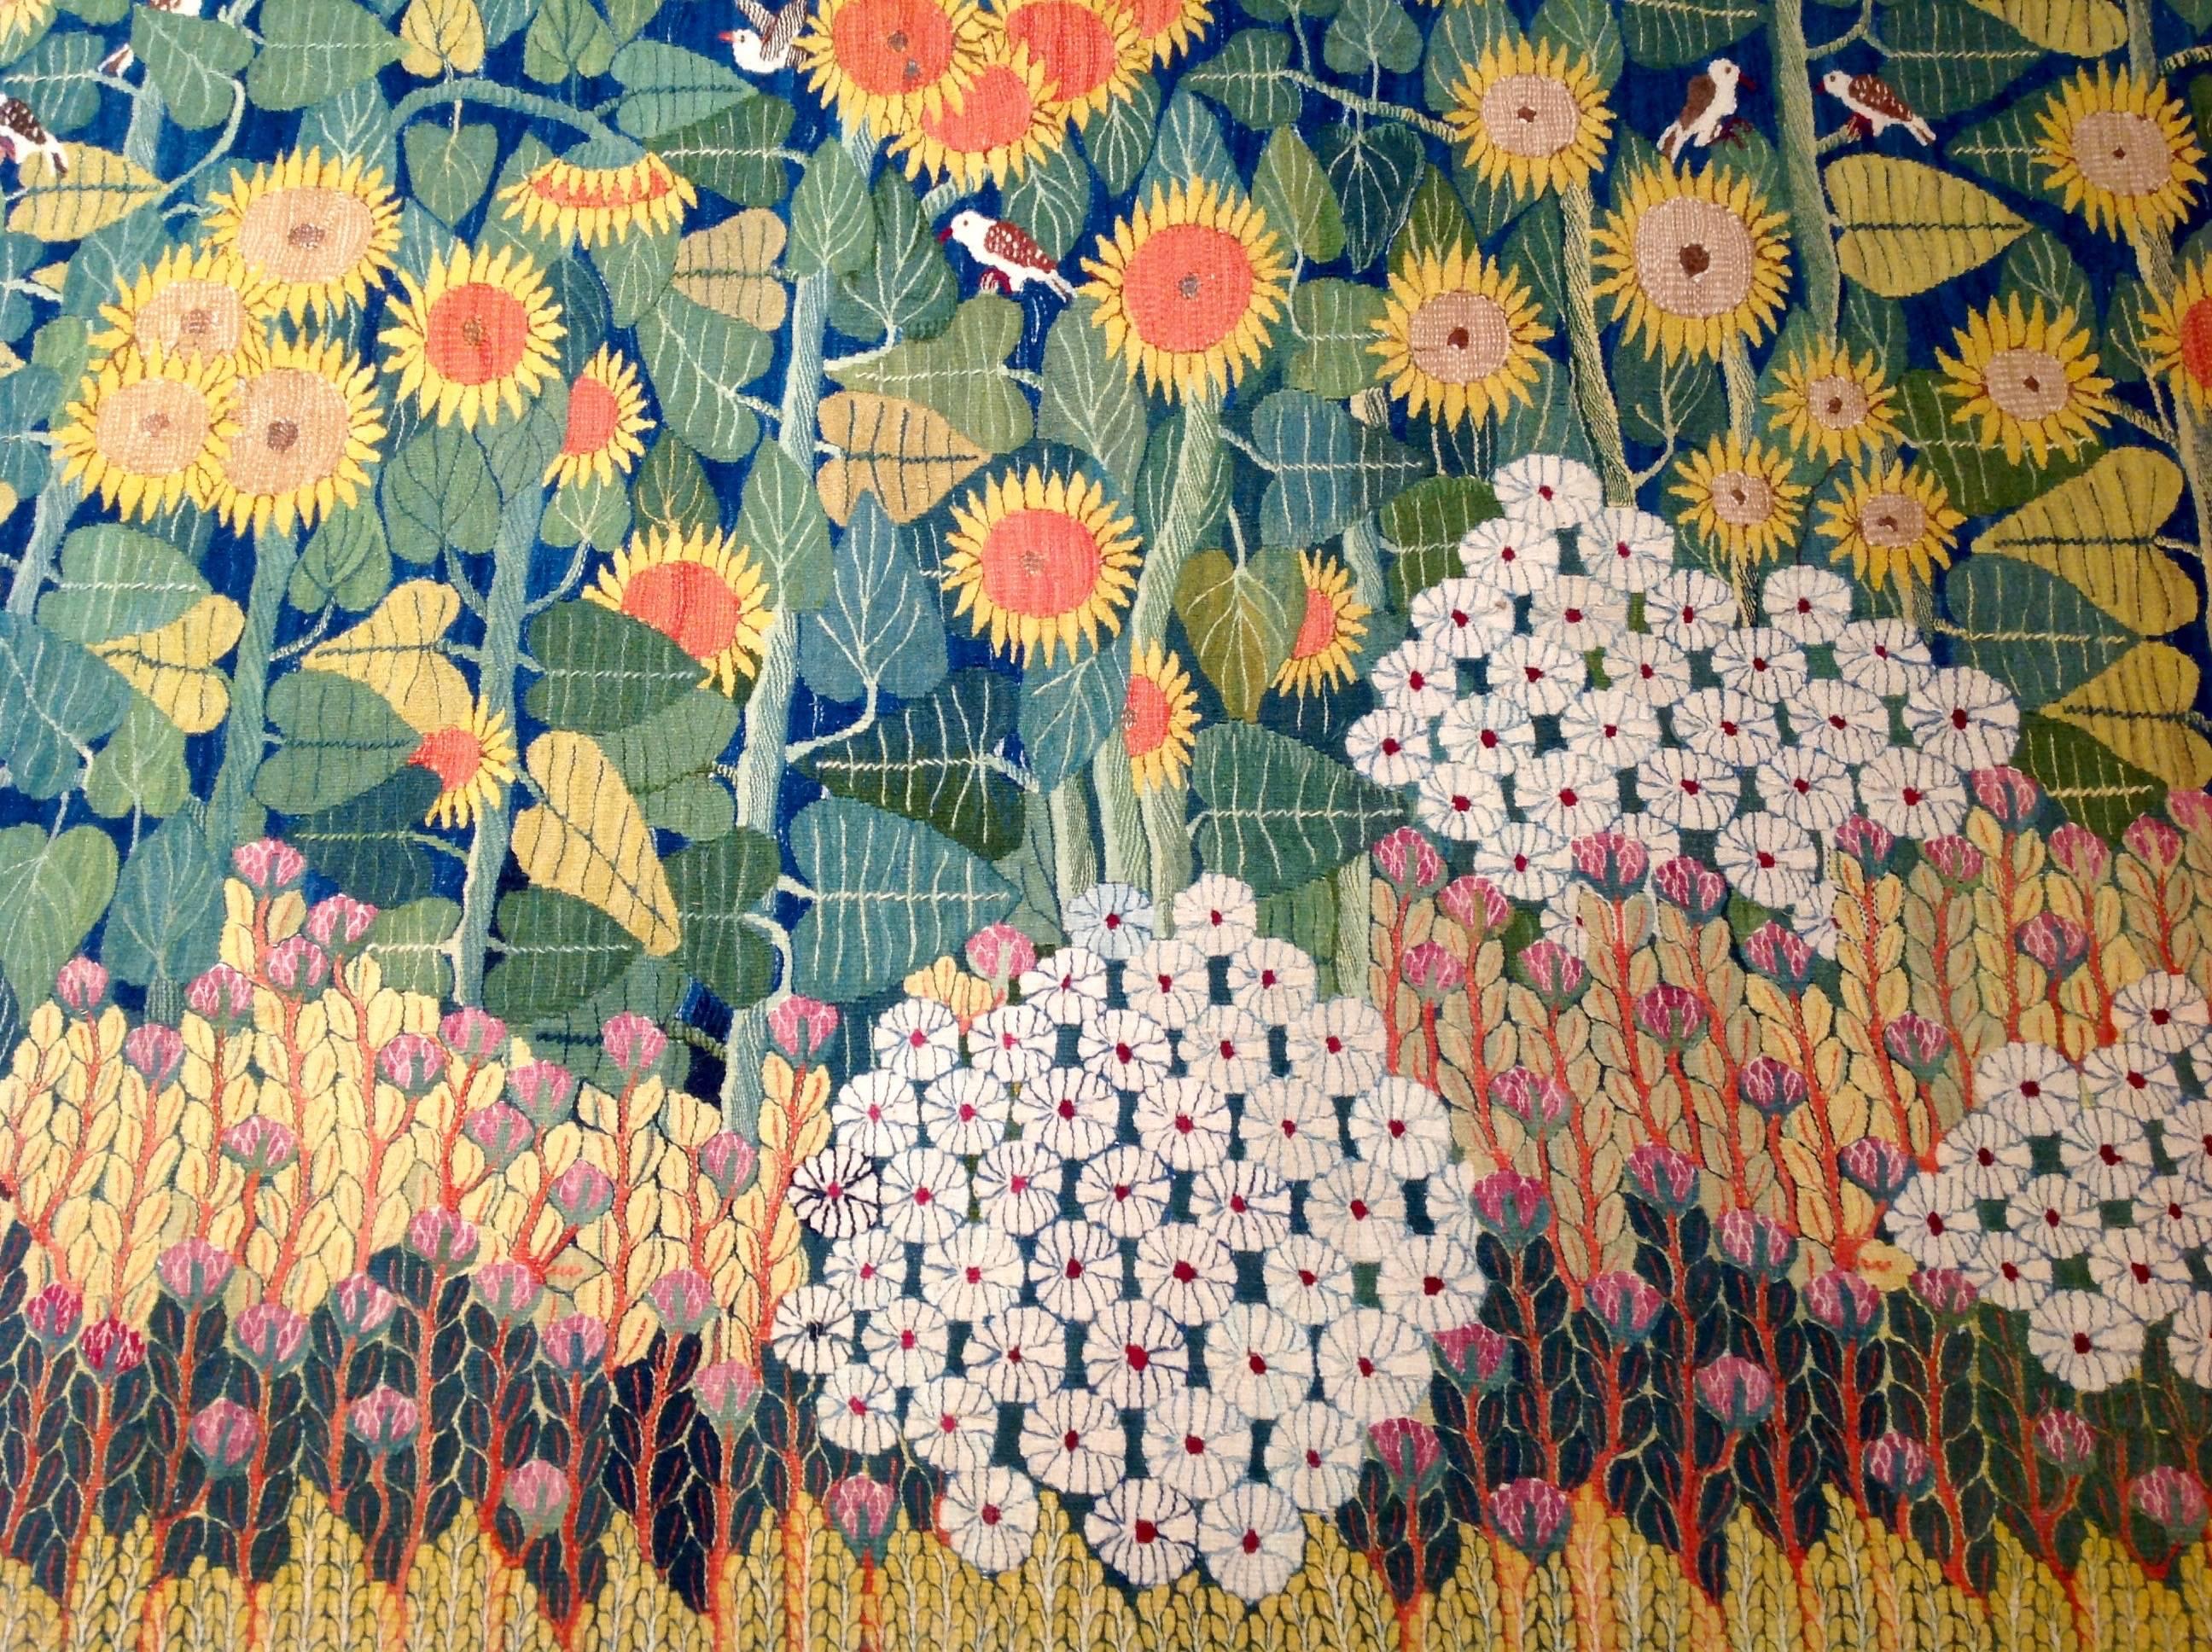 Charming tapestry depicting a sunflower scene. It was handwoven by a young woman artist in the Ramses Wissa Wassef Art Center in Giza Egypt. The tapestry center, founded in 1952 by Ramses Wissa Wassef, was dedicated to releasing the innate